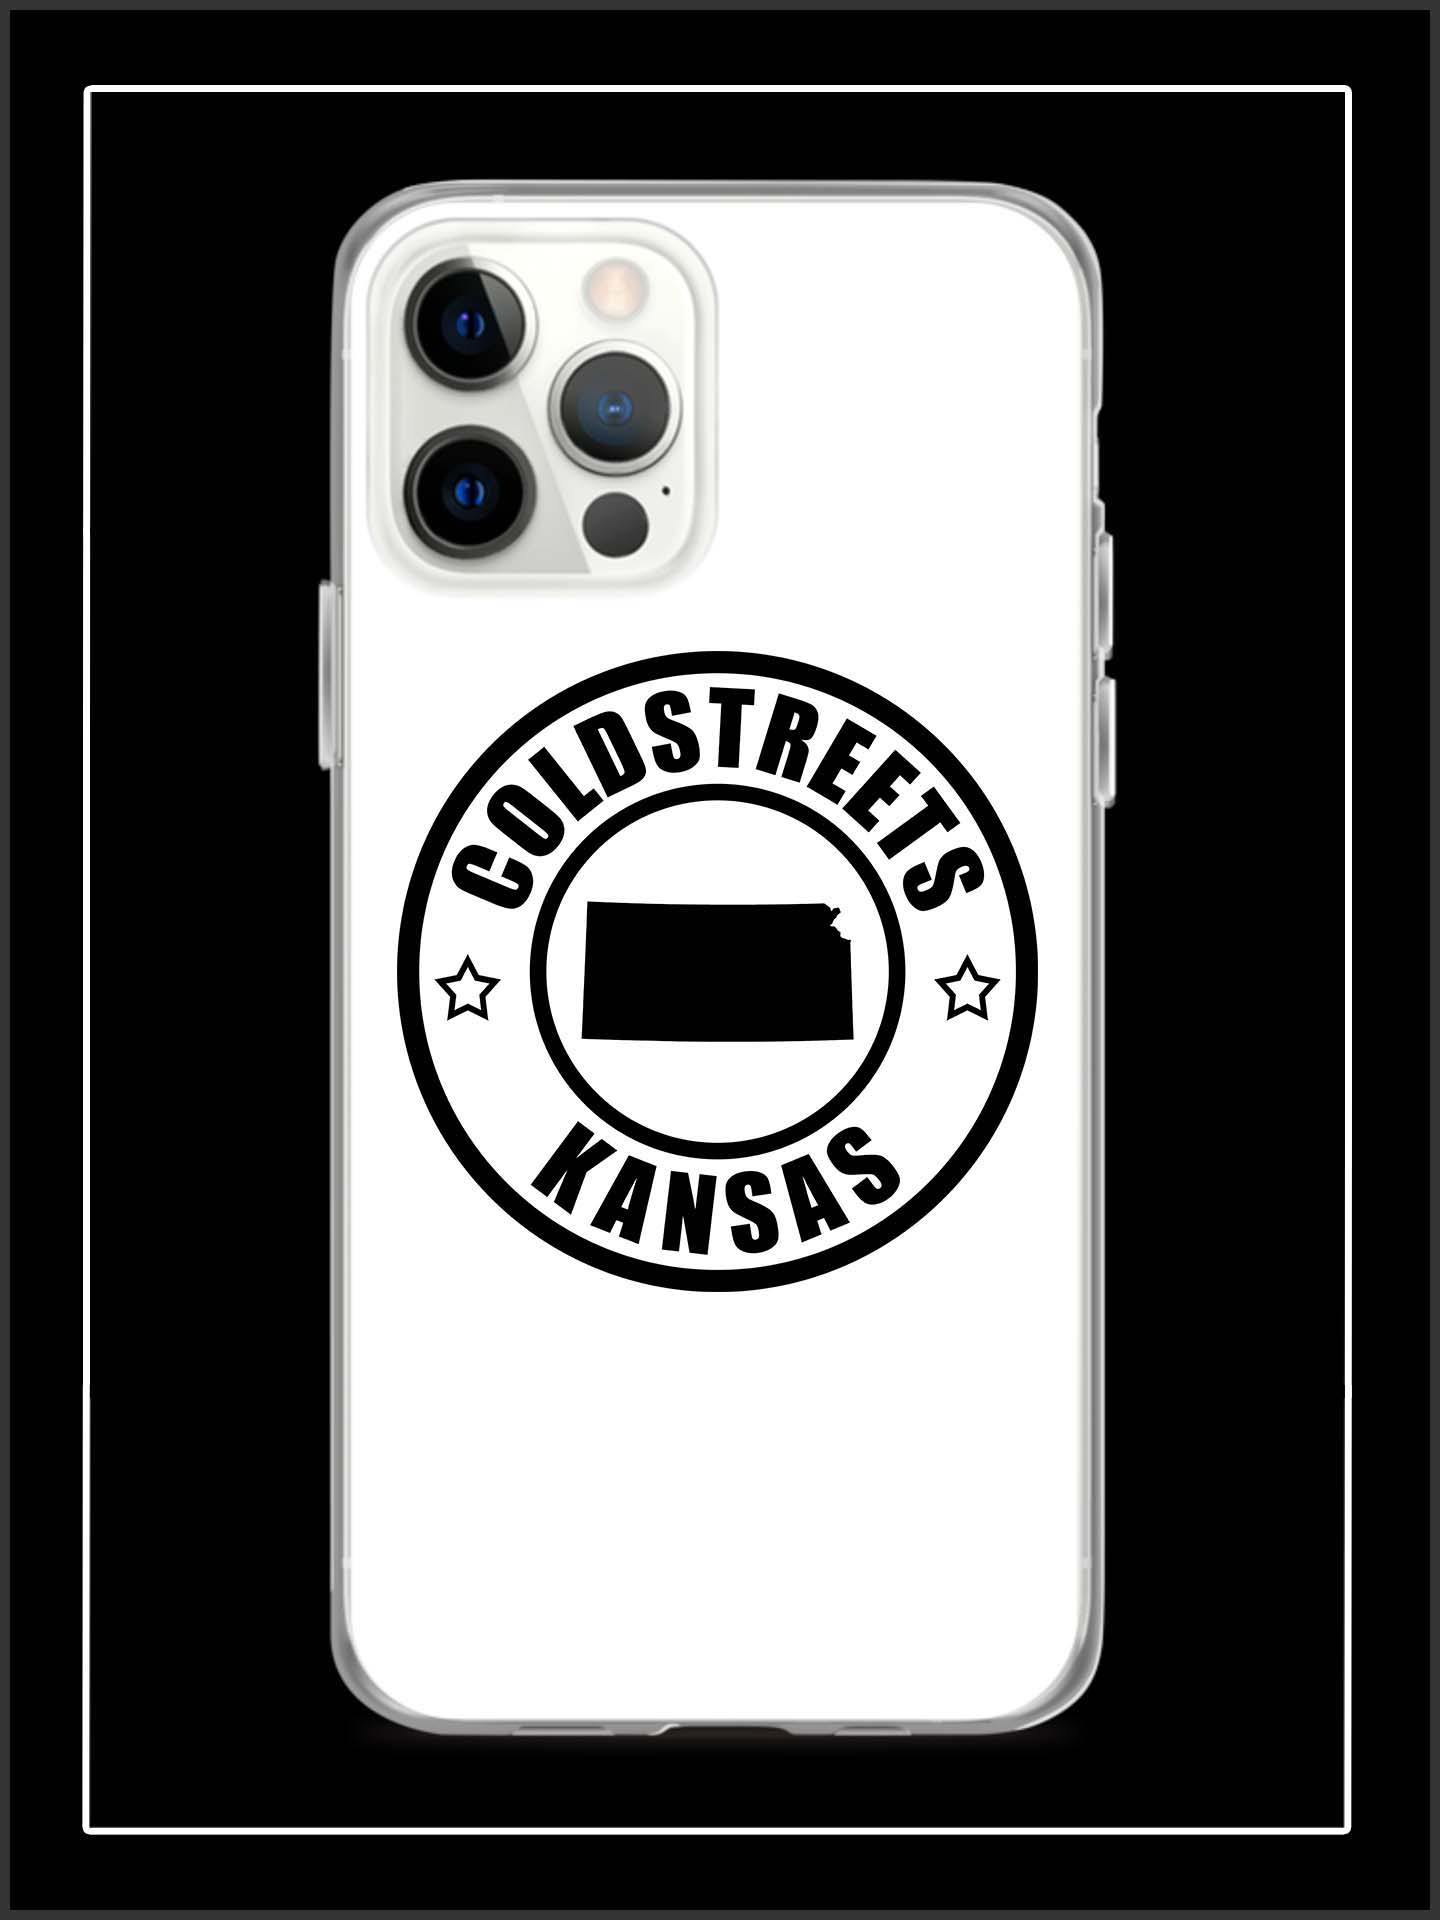 Cold Streets Kansas iPhone Cases